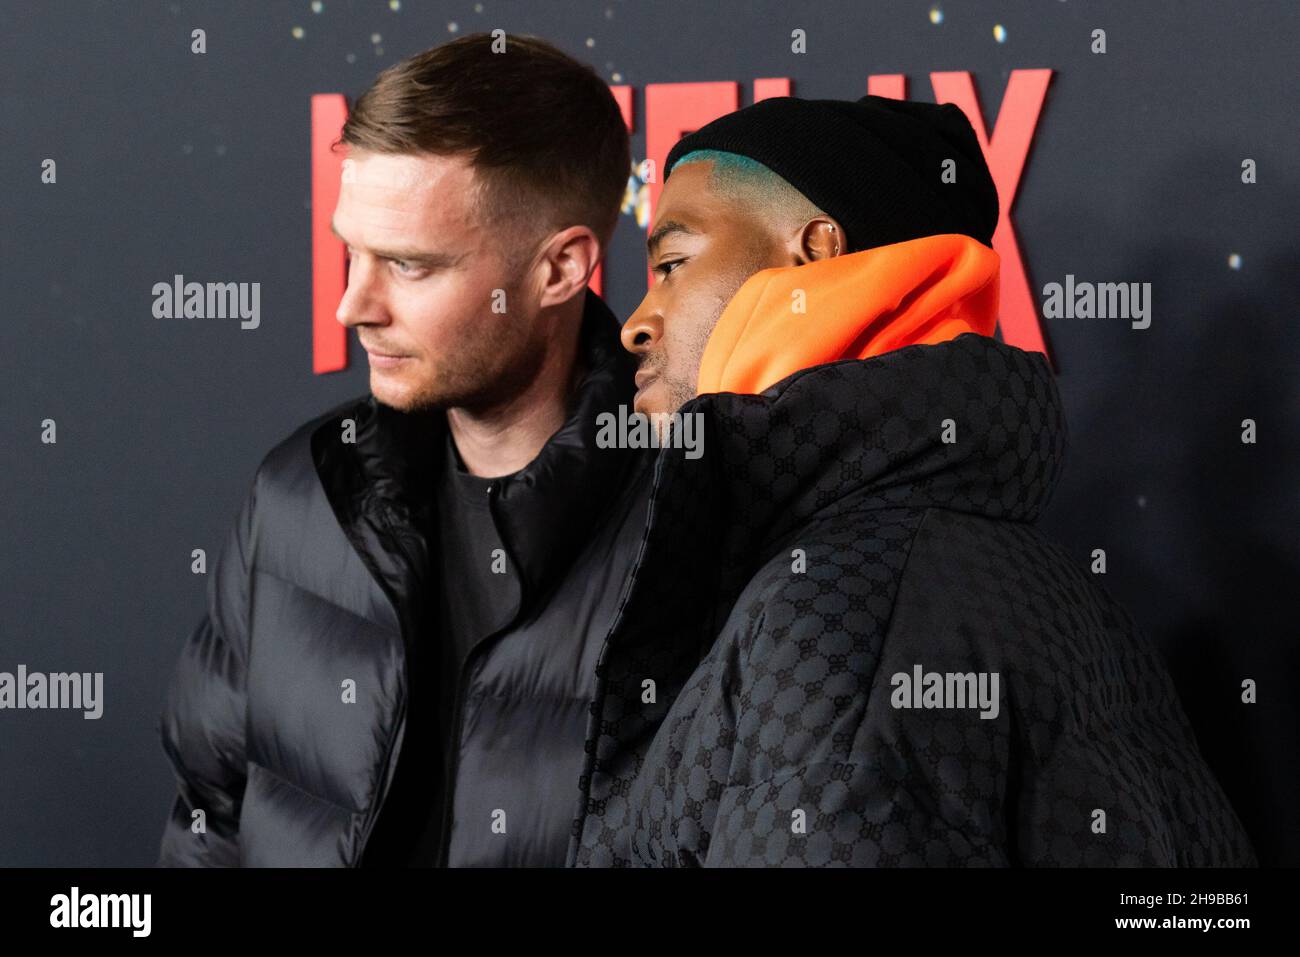 New York, USA. 05th Dec, 2021. Givenchy Creative Director Matthew Williams  and Kid Cudi attend the world premiere of the Netflix star-studded comedy  “Don't Look Up” at Jazz at Lincoln Center in